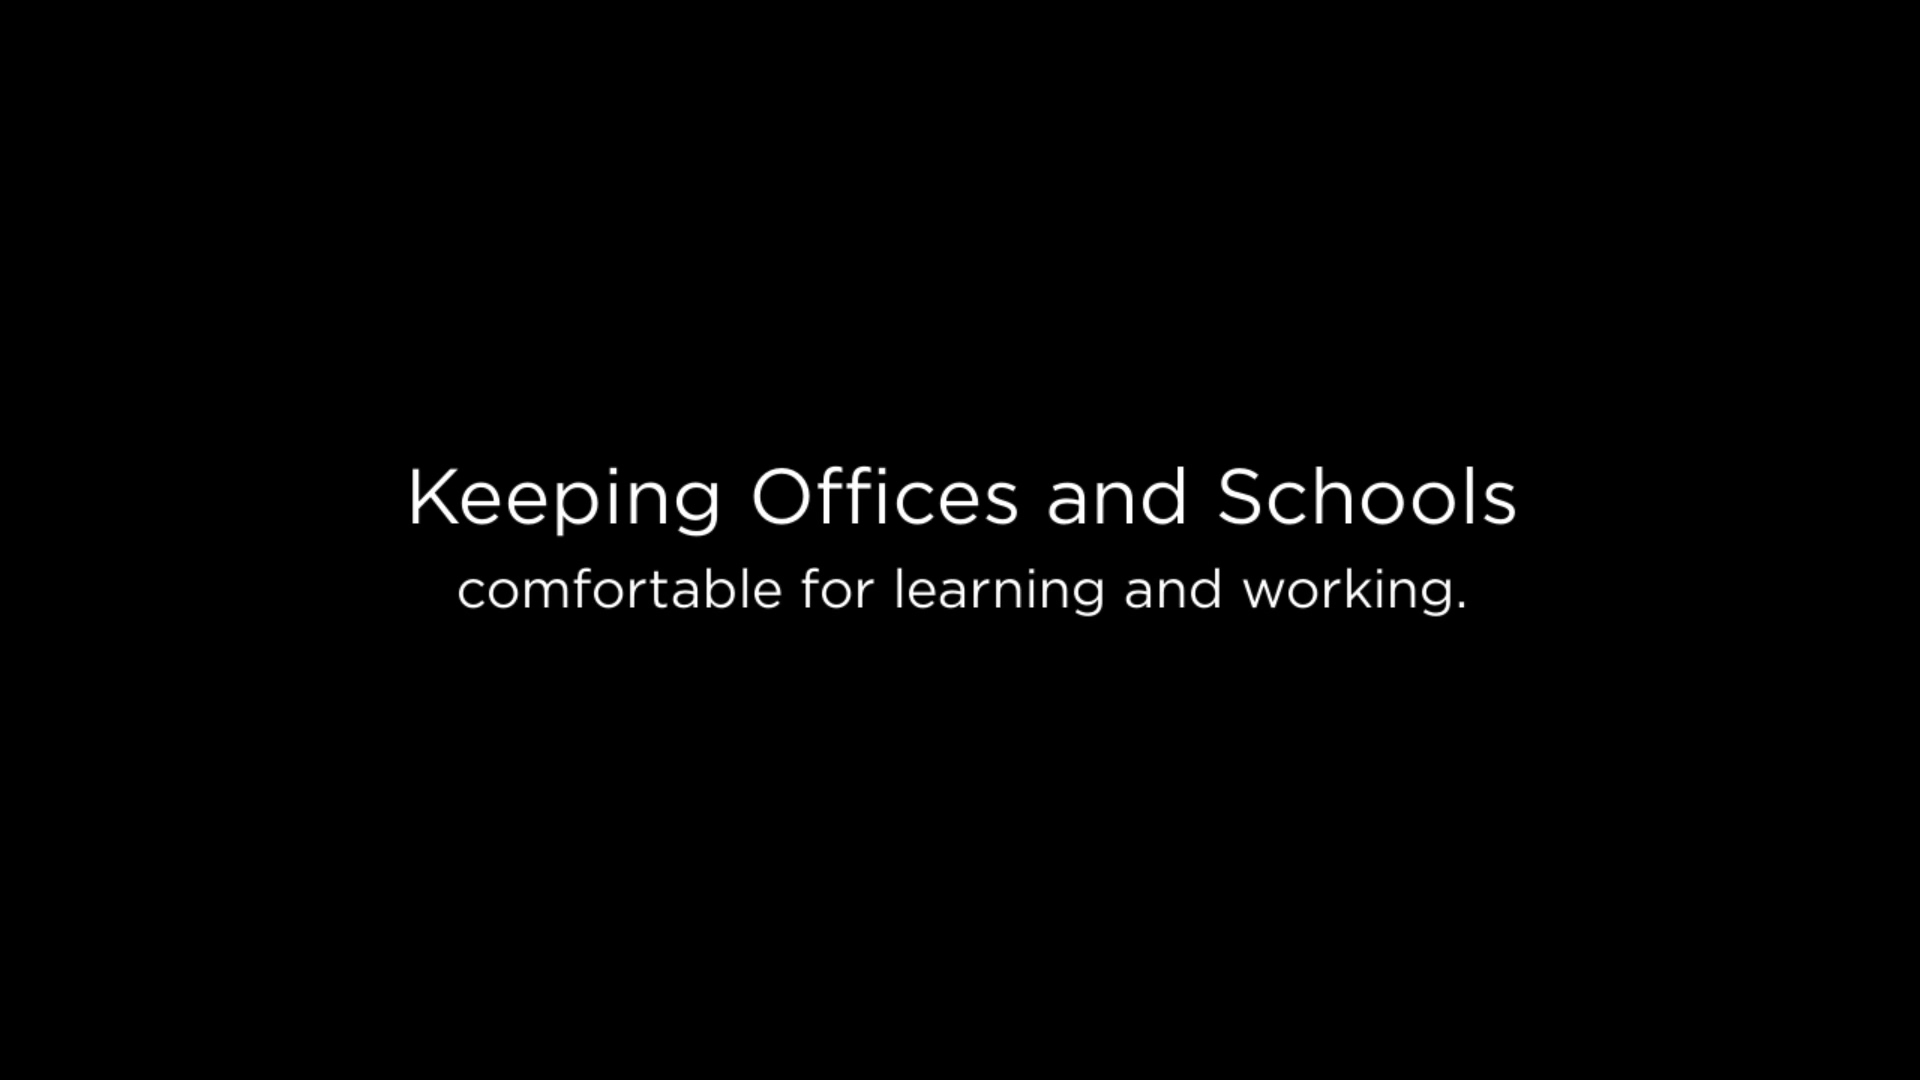 Offices_and_Schools_1080p